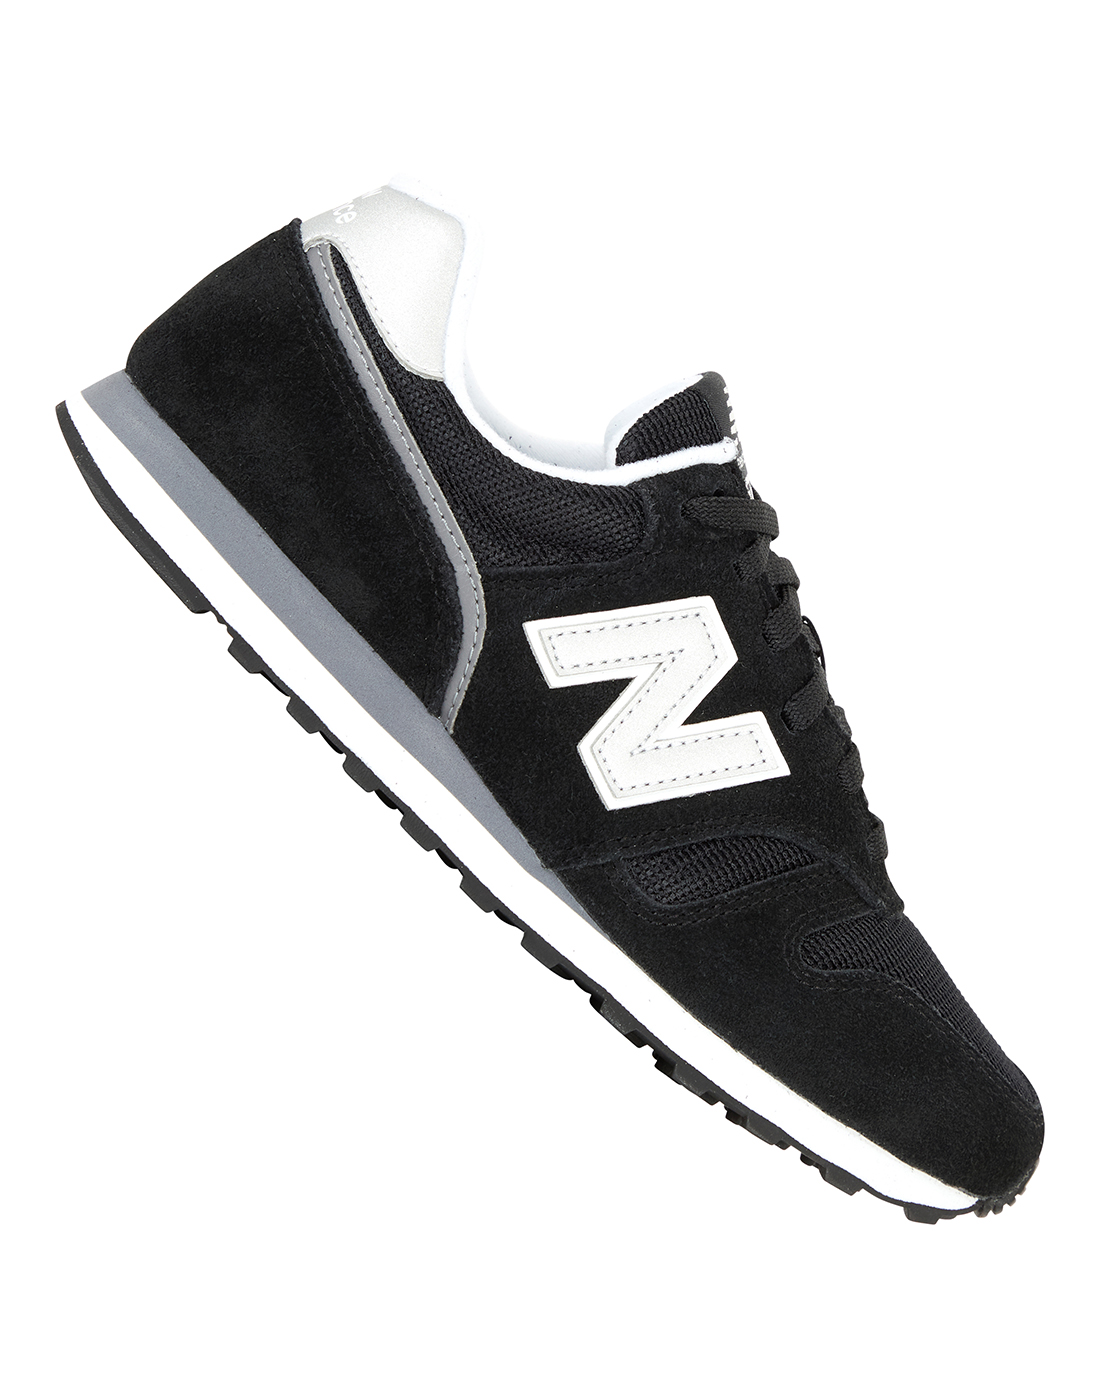 New Balance Womens 373 Trainer - Black | Life Style Sports IE